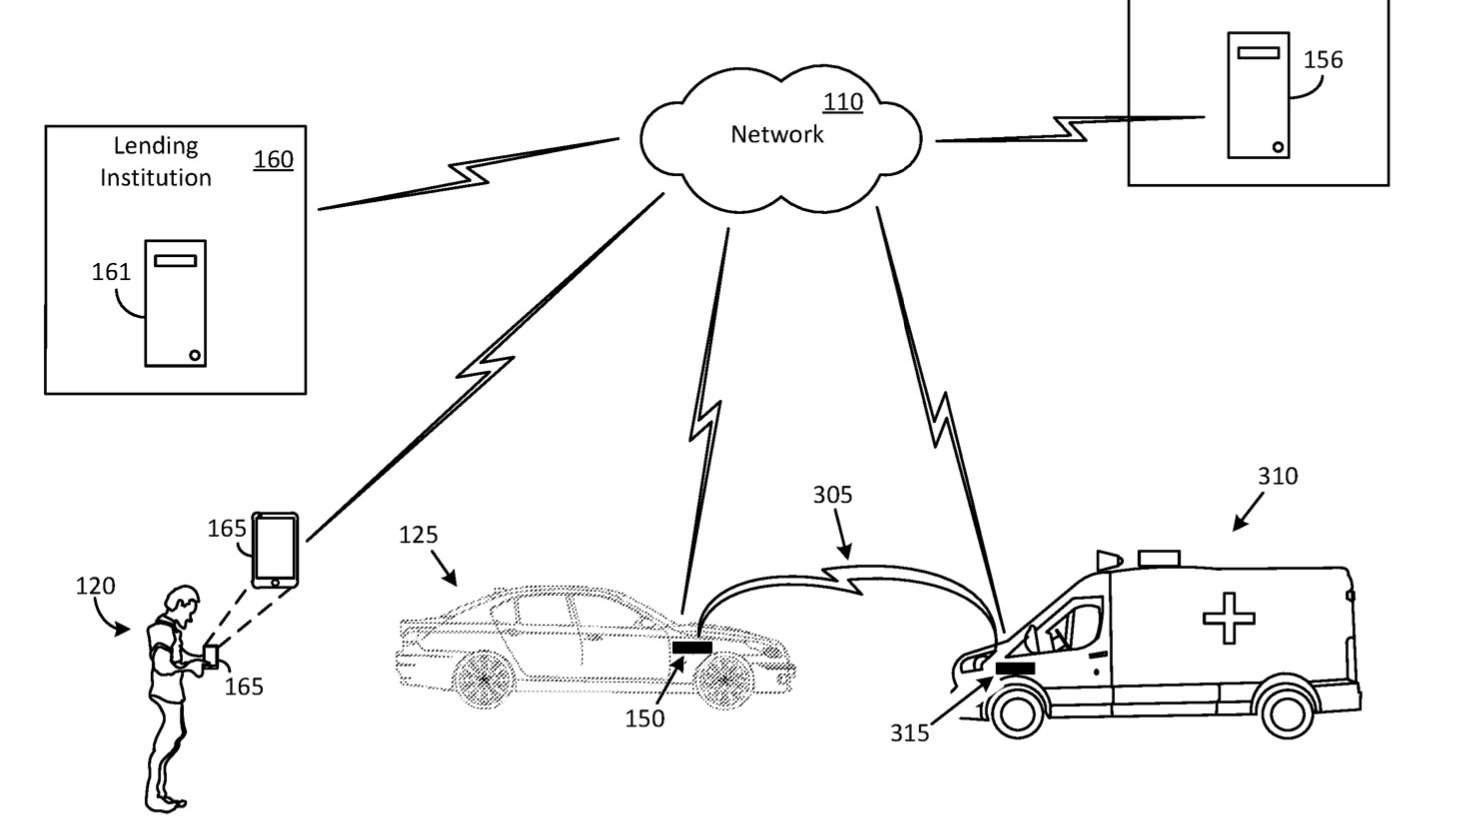 Ford vehicle repossession system patent image